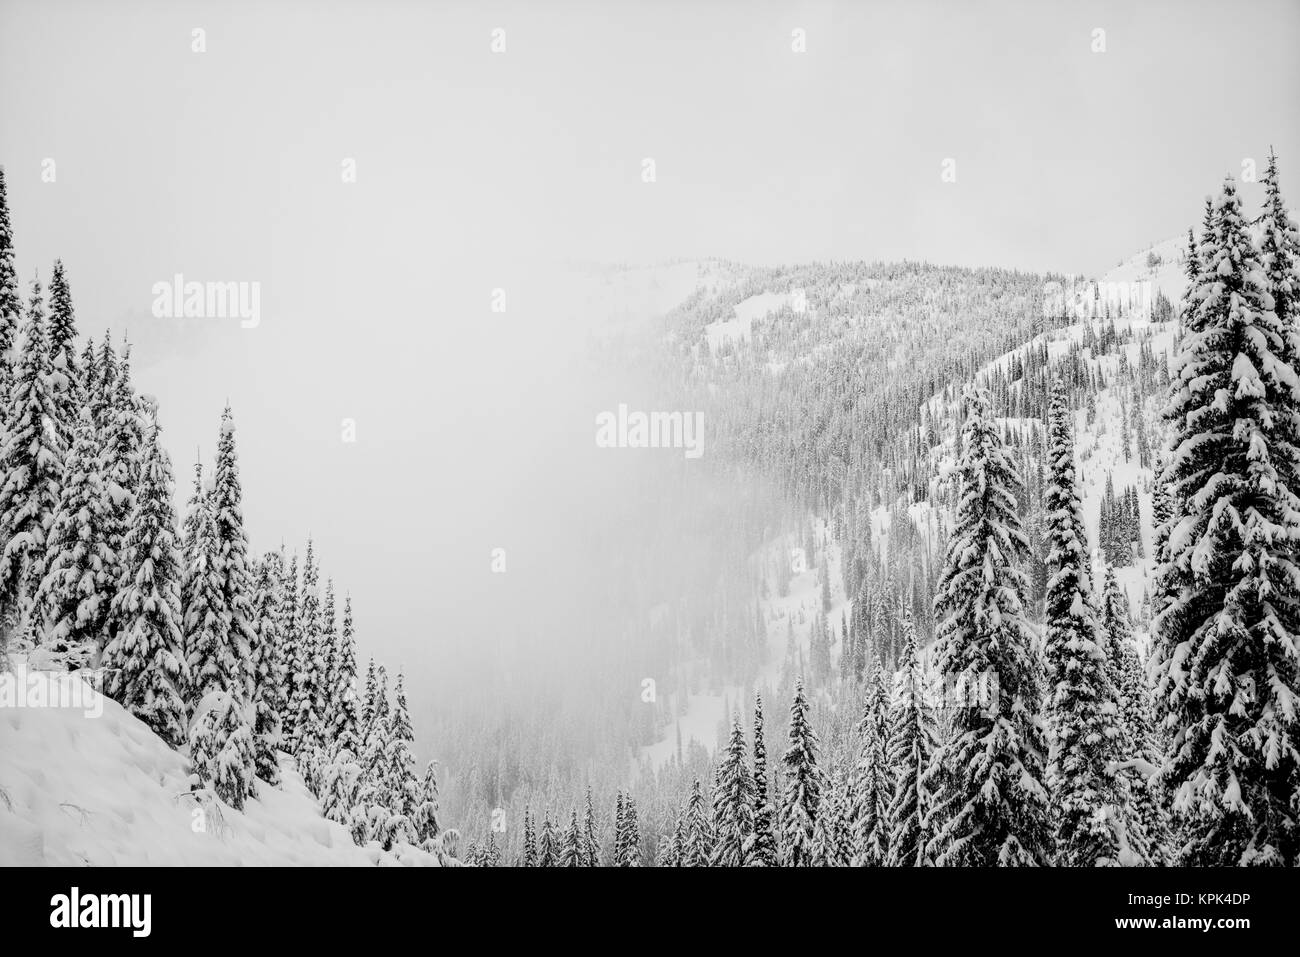 Forests on the mountains covered in snow in the fog, Whitewater Resort; Nelson, British Columbia, Canada Stock Photo